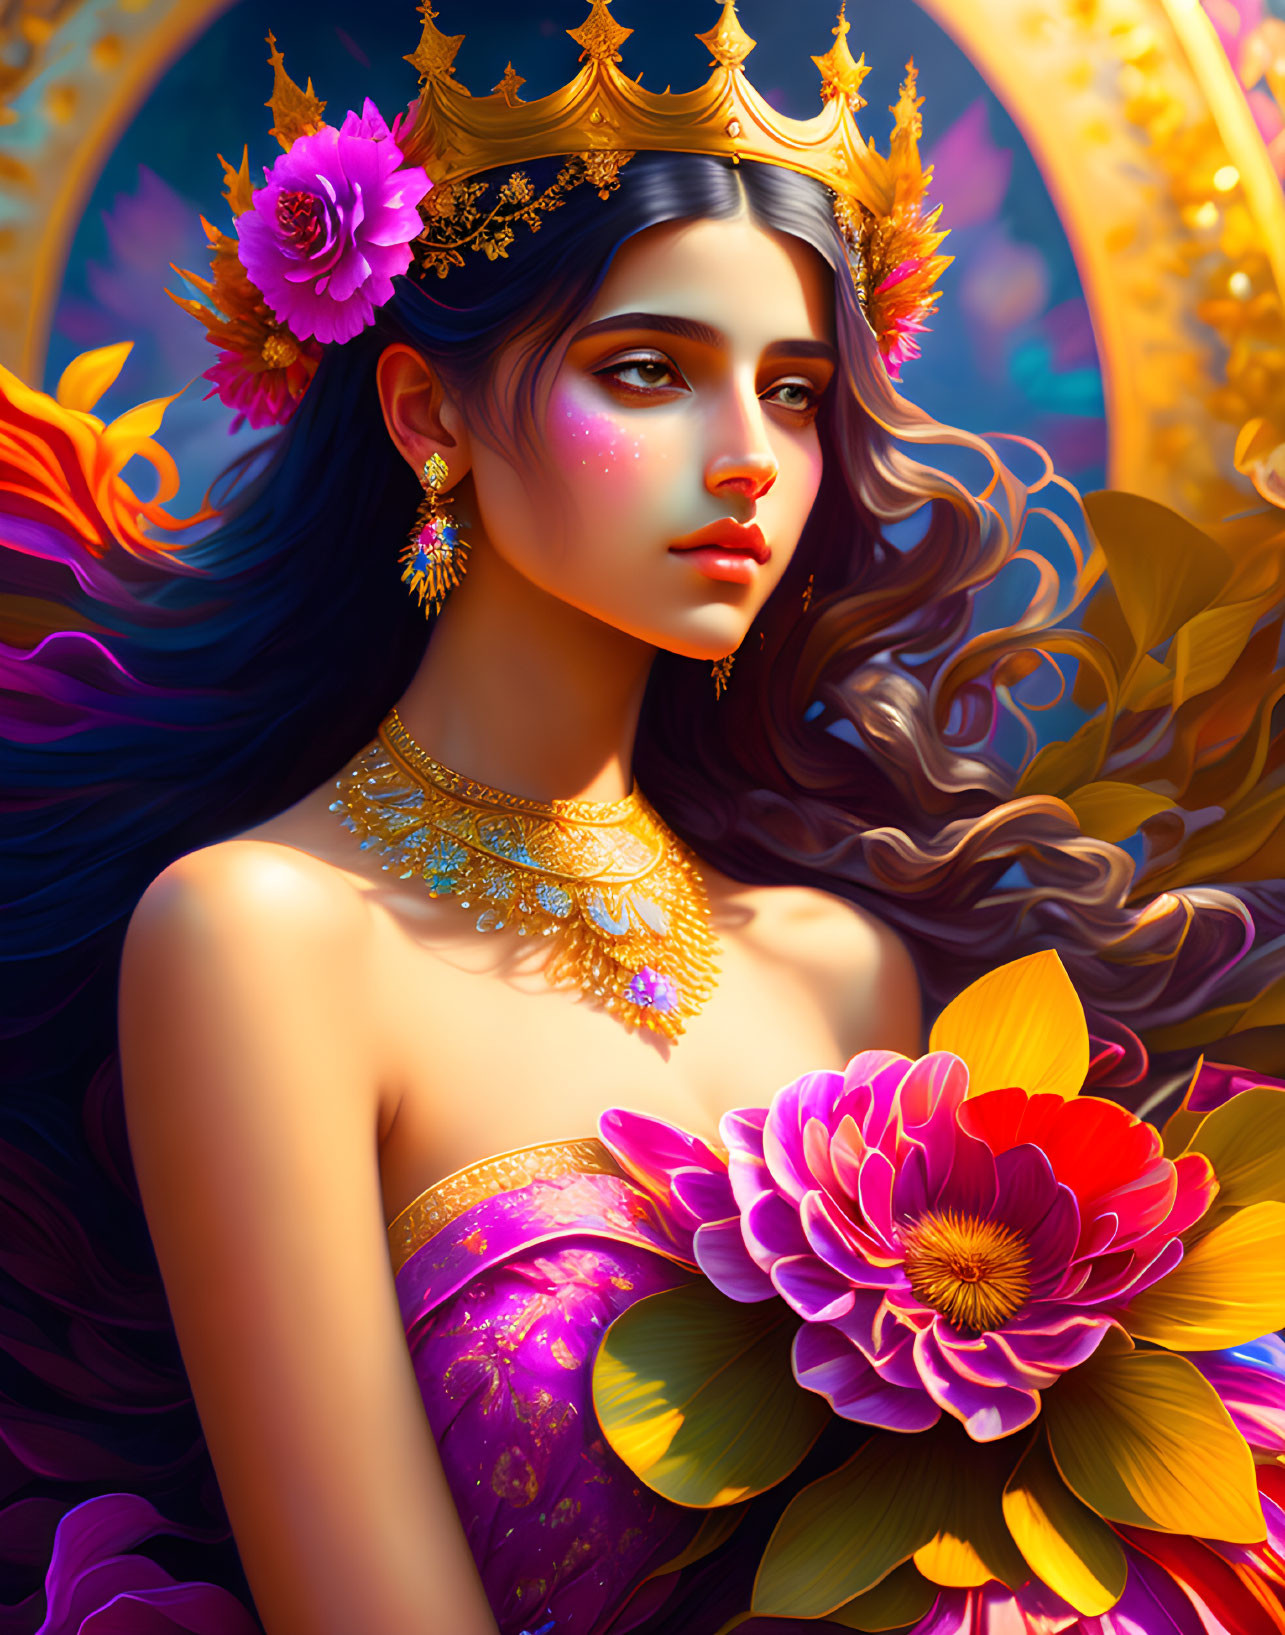 Digital illustration of woman with brown hair, golden crown, pink flowers, gold jewelry, purple dress,